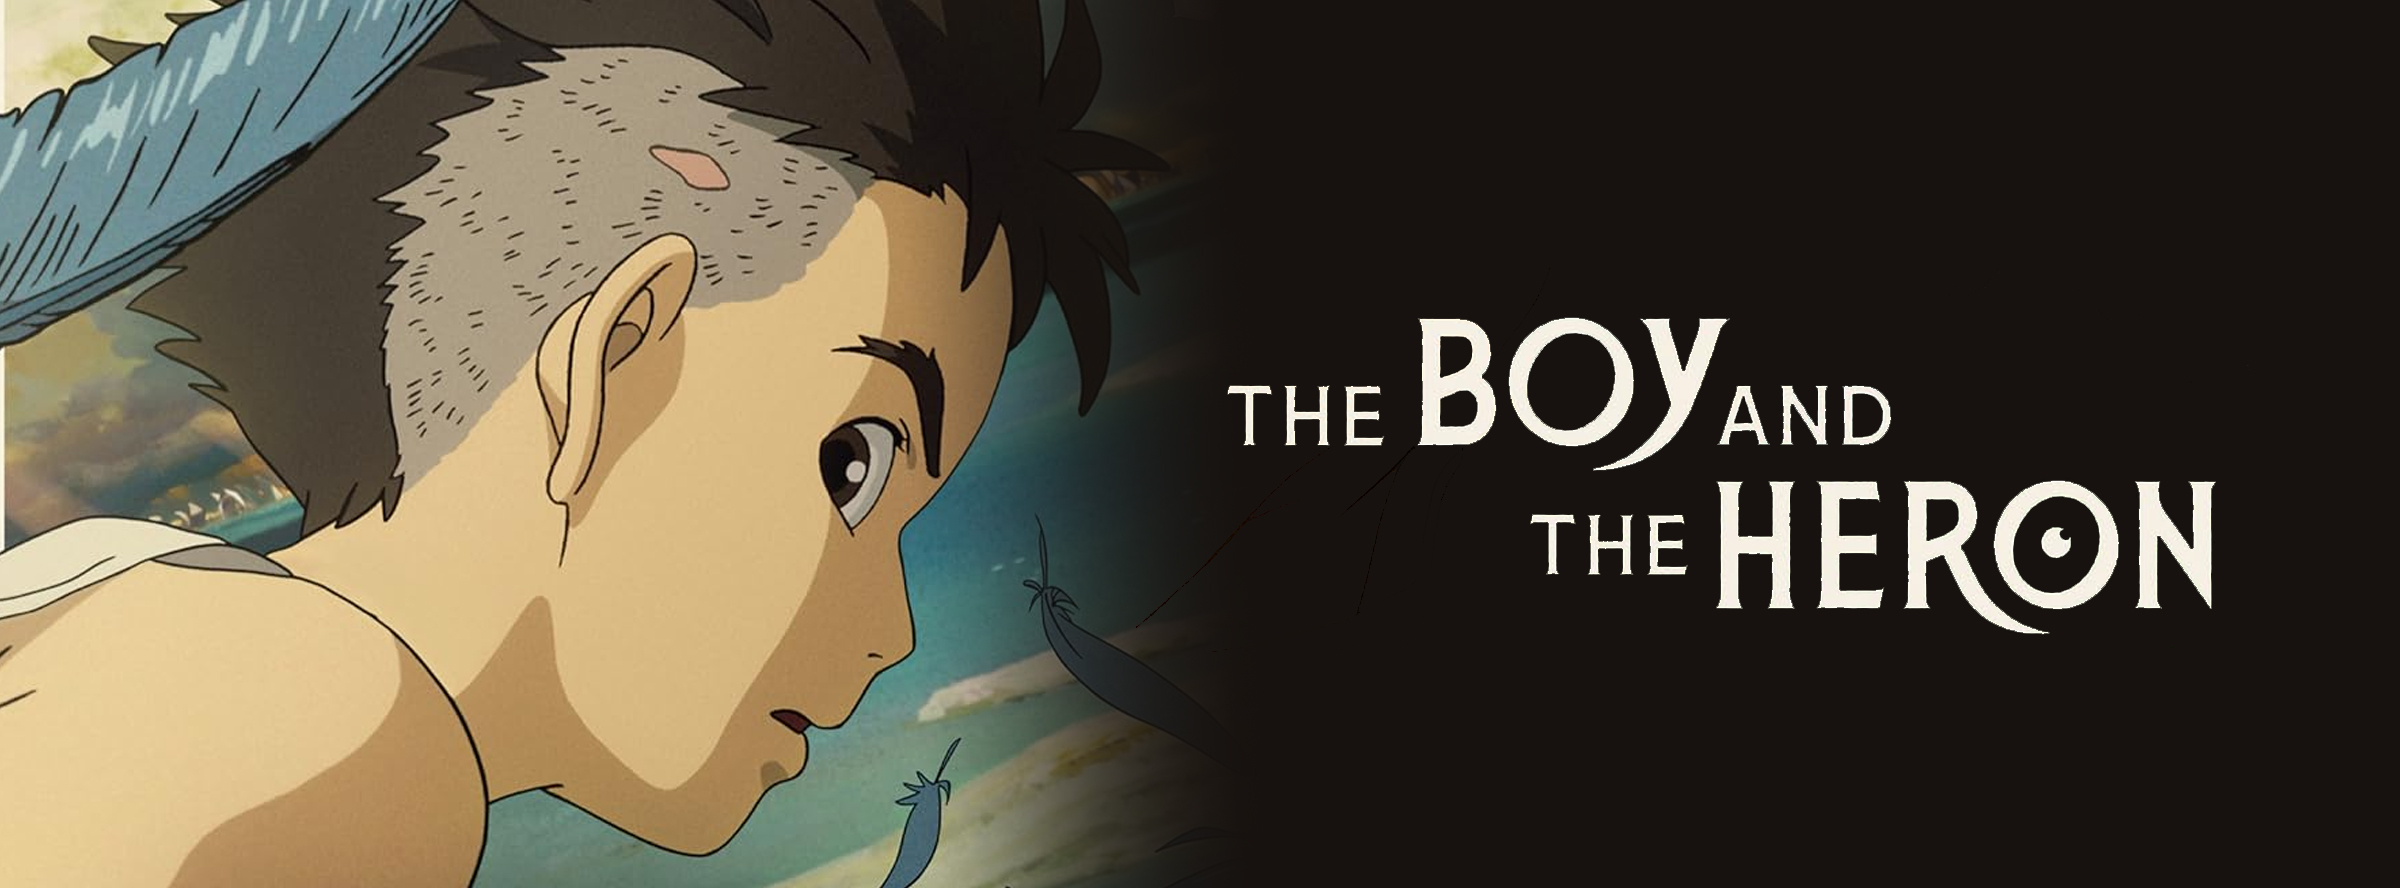 Slider Image for The Boy and the Heron